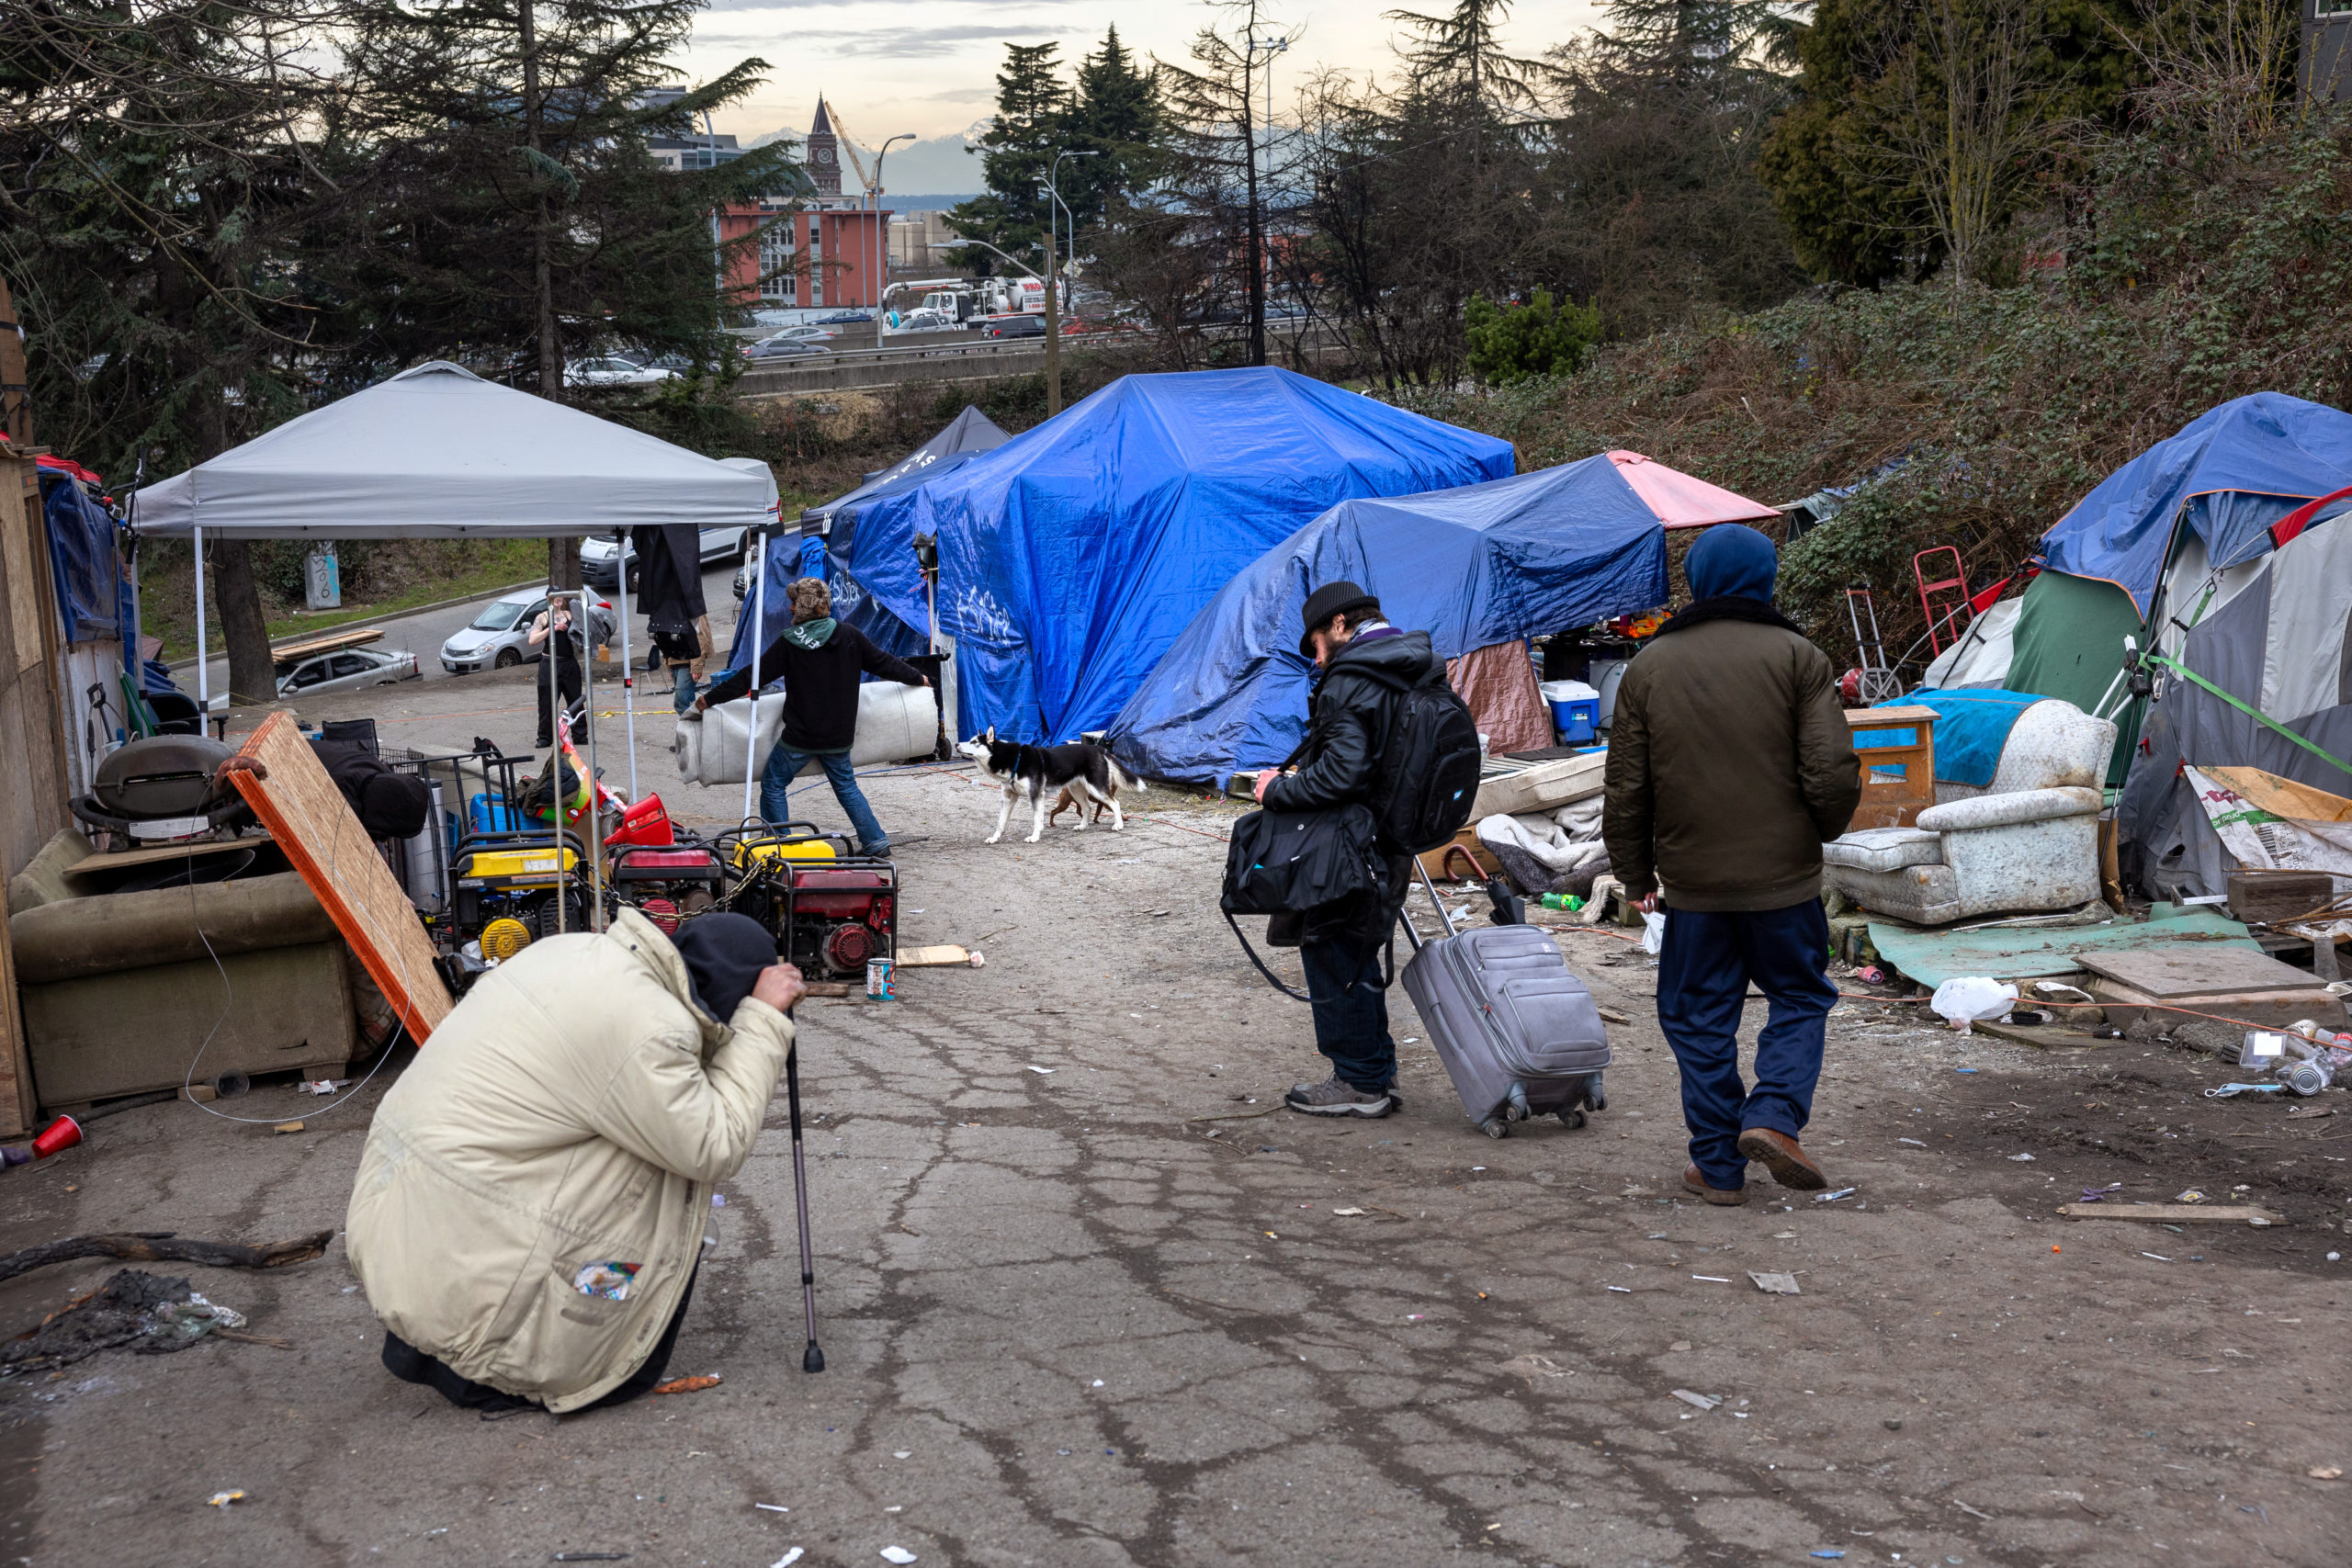 SEATTLE, WASHINGTON - MARCH 11: Residents of a homeless encampment walk through the encampment after smoking fentanyl on March 11, 2022 in Seattle, Washington. The city government is currently working to remove such encampments from shared spaces throughout Seattle. According to a recent report commissioned by Seattle Councilmember Andrew Lewis, the COVID-19 pandemic put undue pressure on the city's shelter system and delayed funds for new housing, leading to an increase in homelessness. (Photo by John Moore/Getty Images)